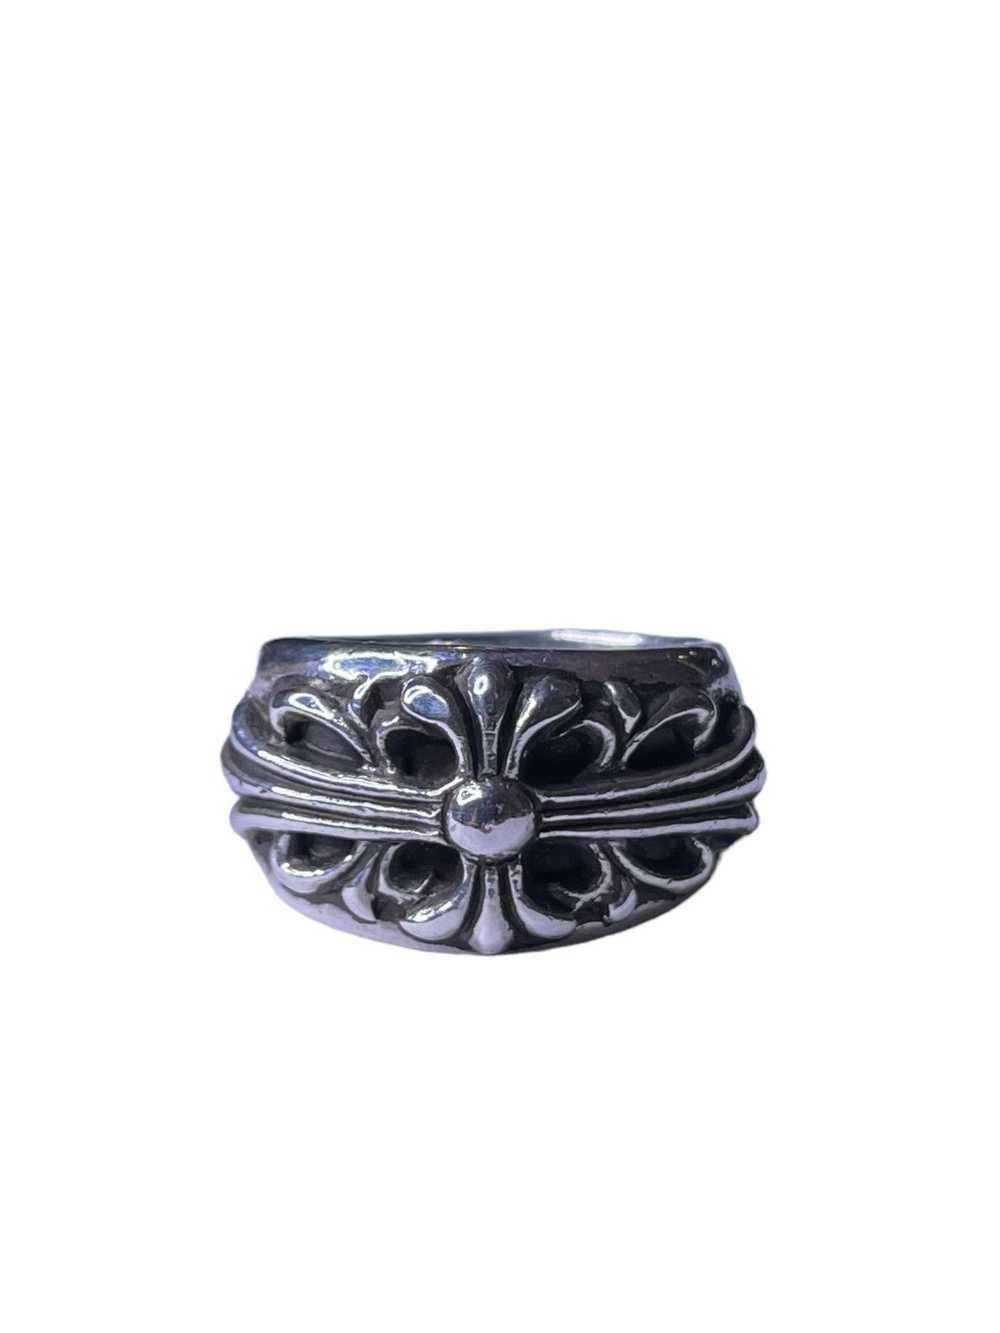 Chrome Hearts × Vintage Chrome Hearts floral ring - image 3